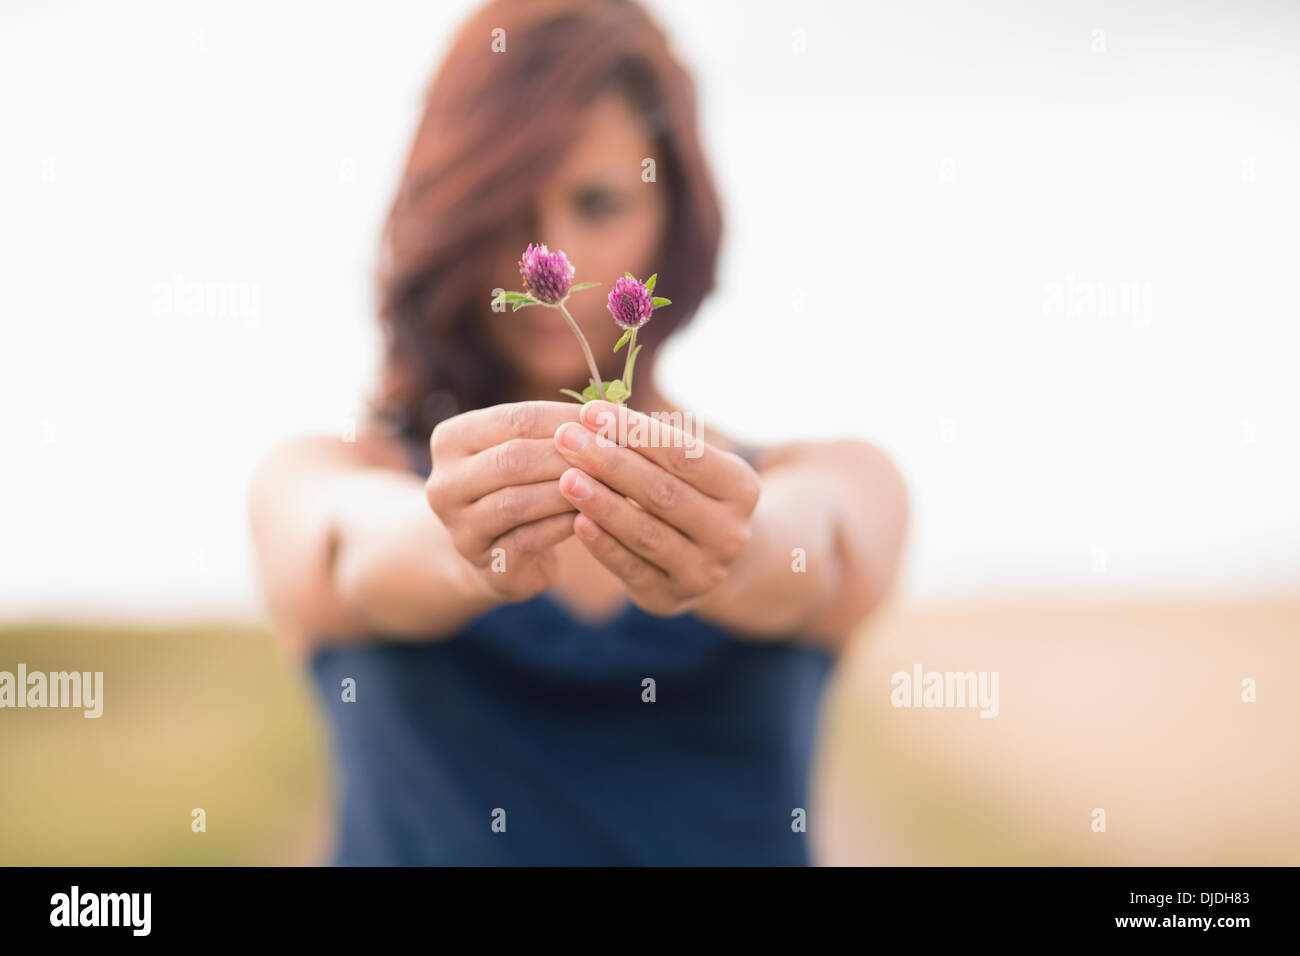 Blurred woman holding out wild flowers against clear sky Stock Photo